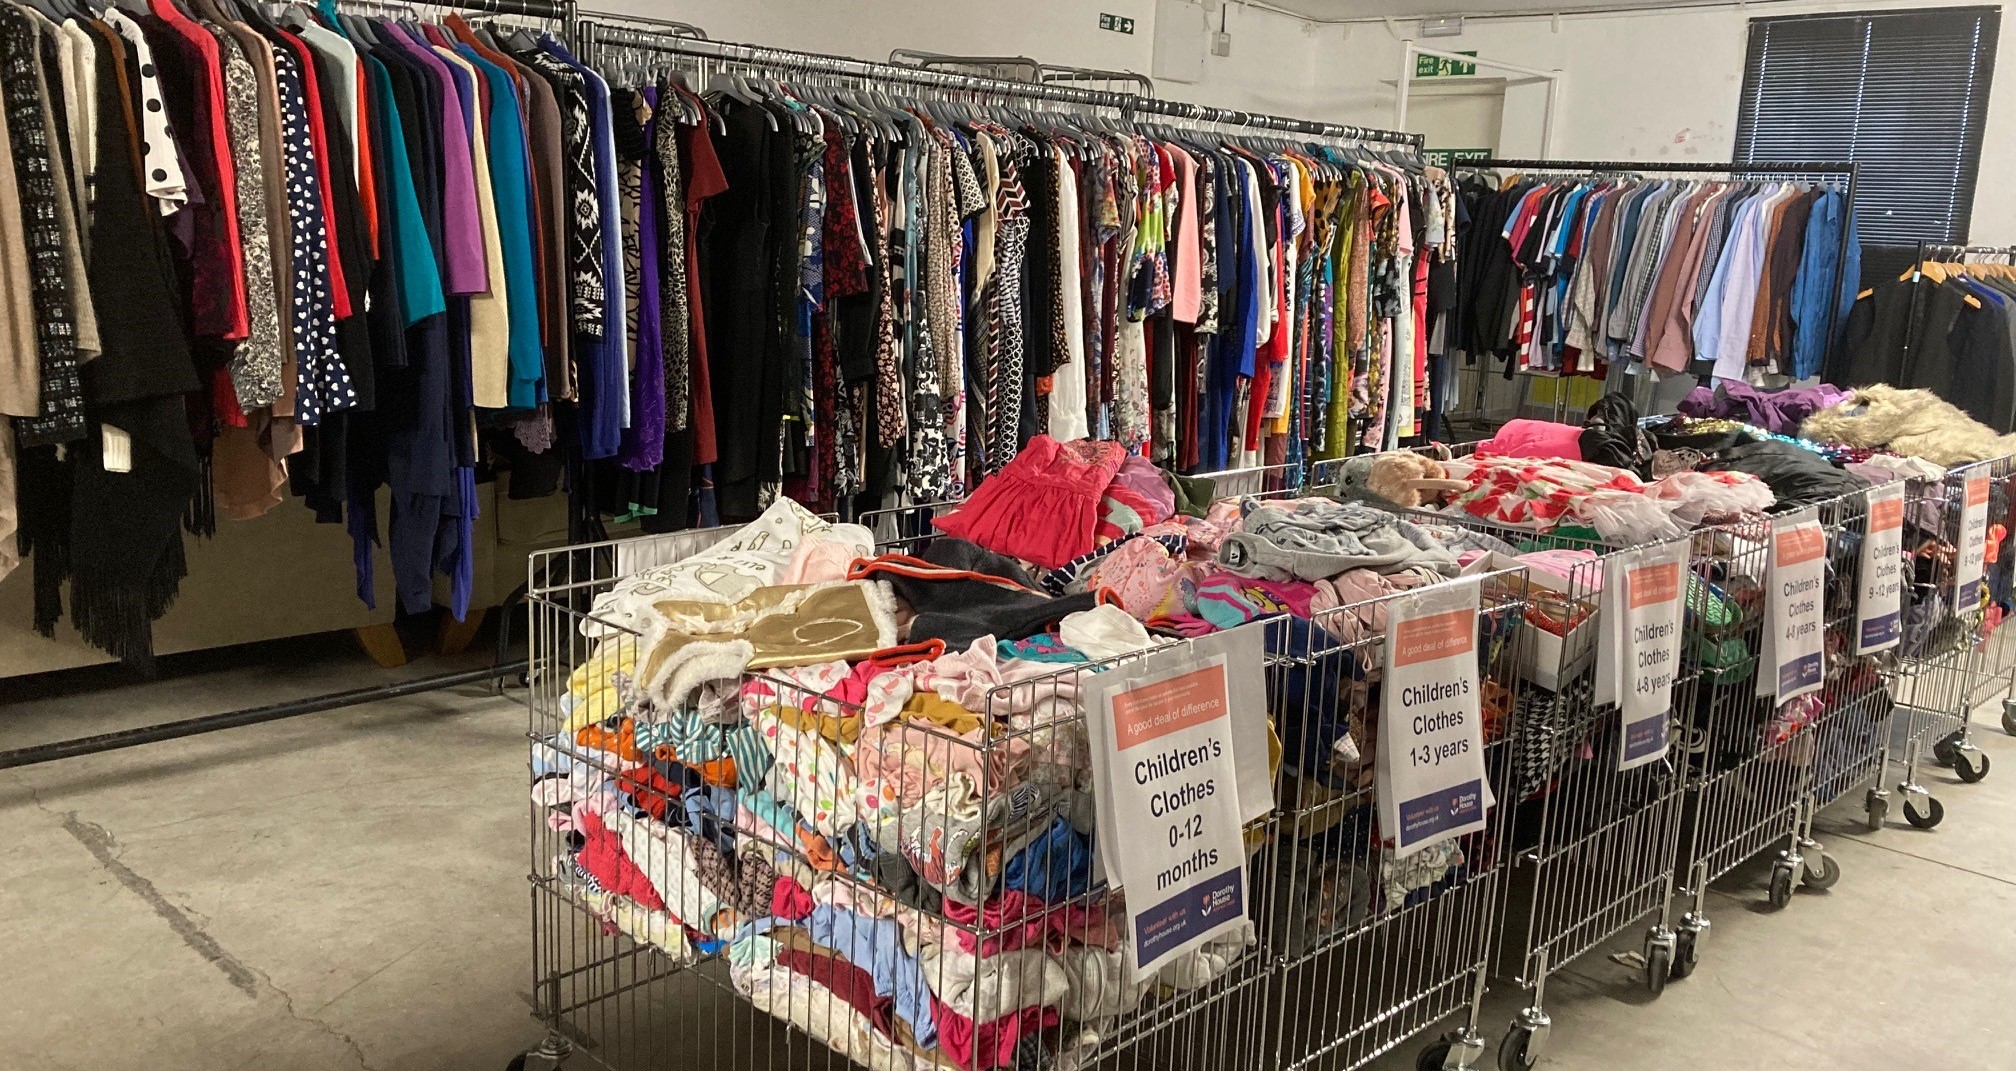 Clothing hanging on rails at the Warehouse sale